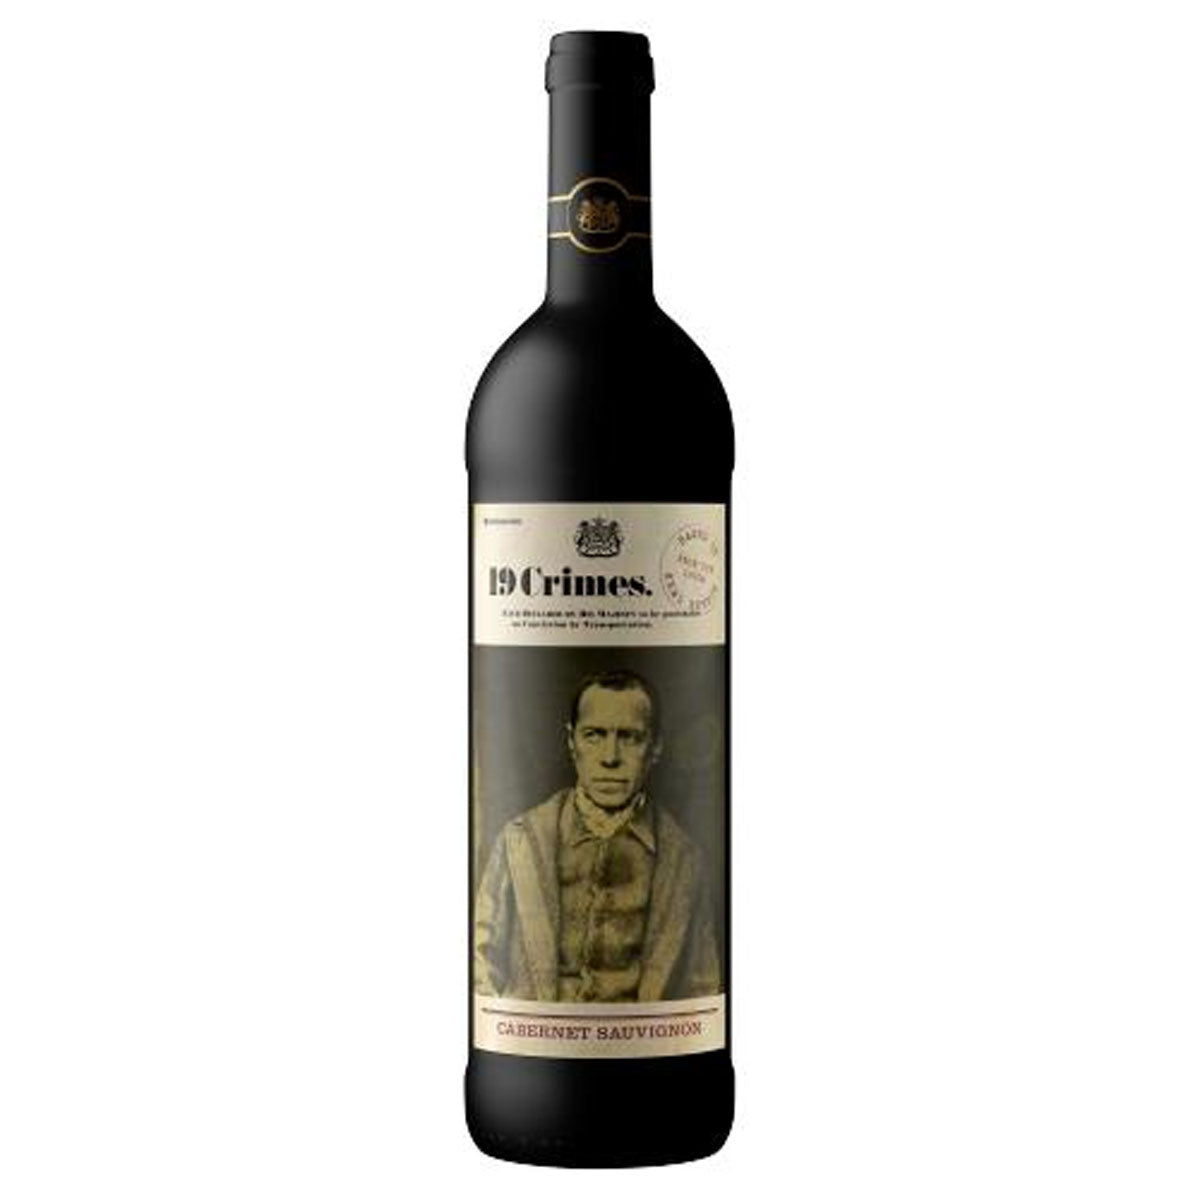 A bottle of 19 Crimes - Cabernet Sauvignon (13% ABV) - 750ml with a picture of a man.